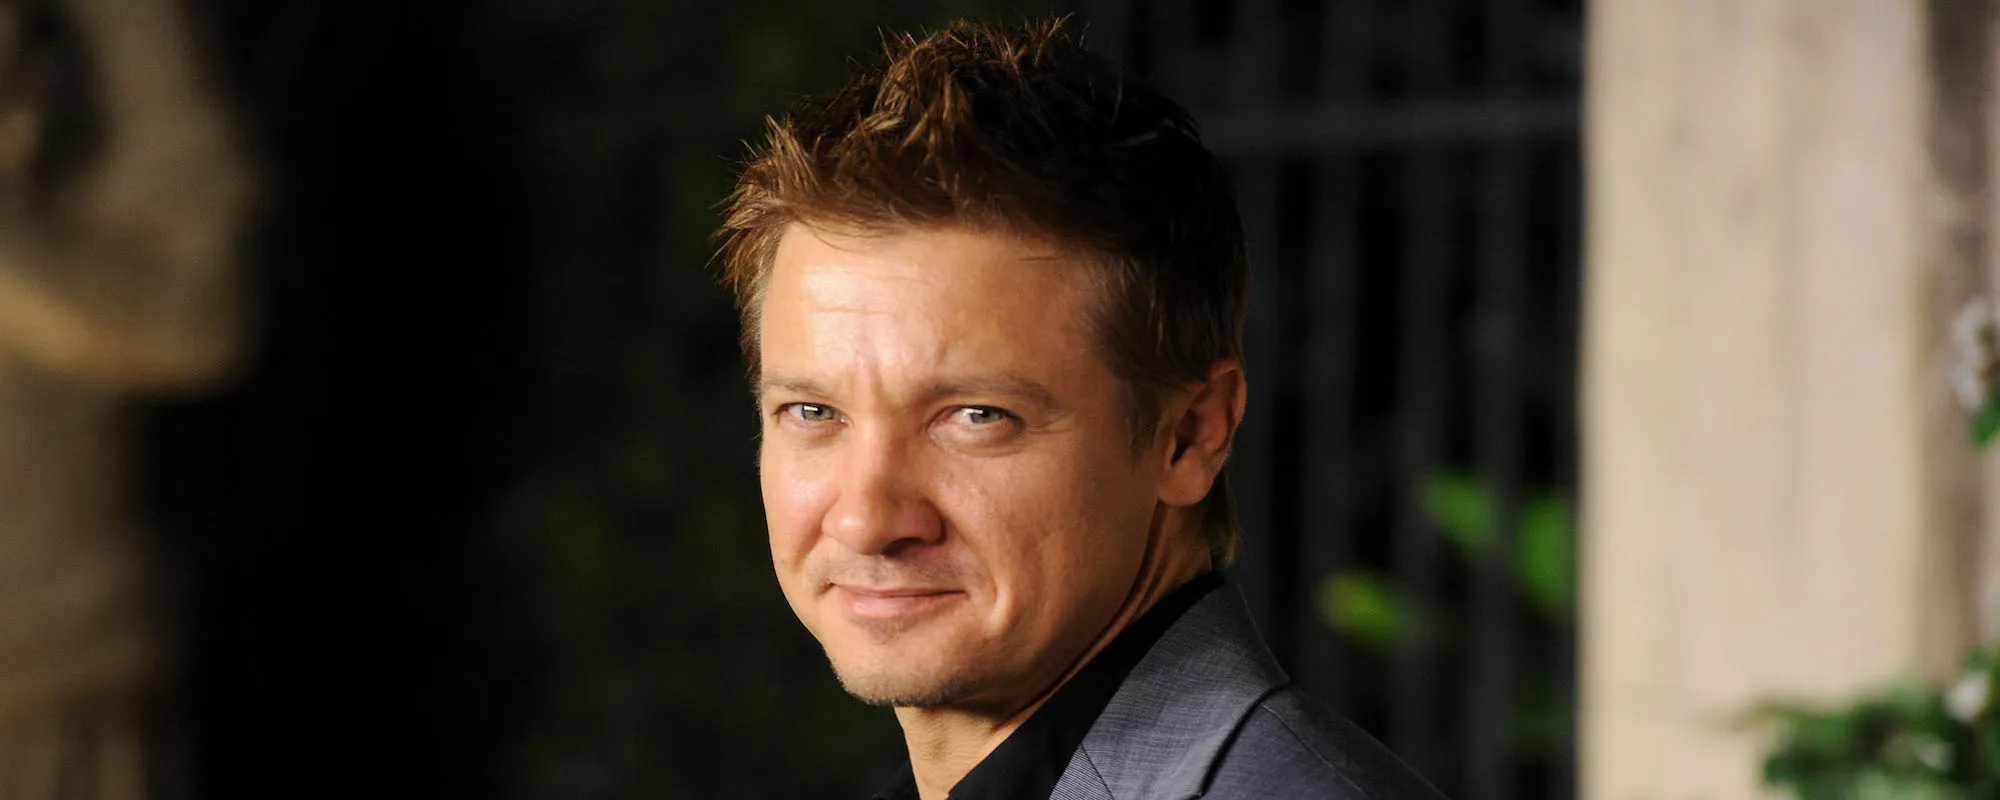 5 Songs You Didn’t Know Actor Jeremy Renner Wrote